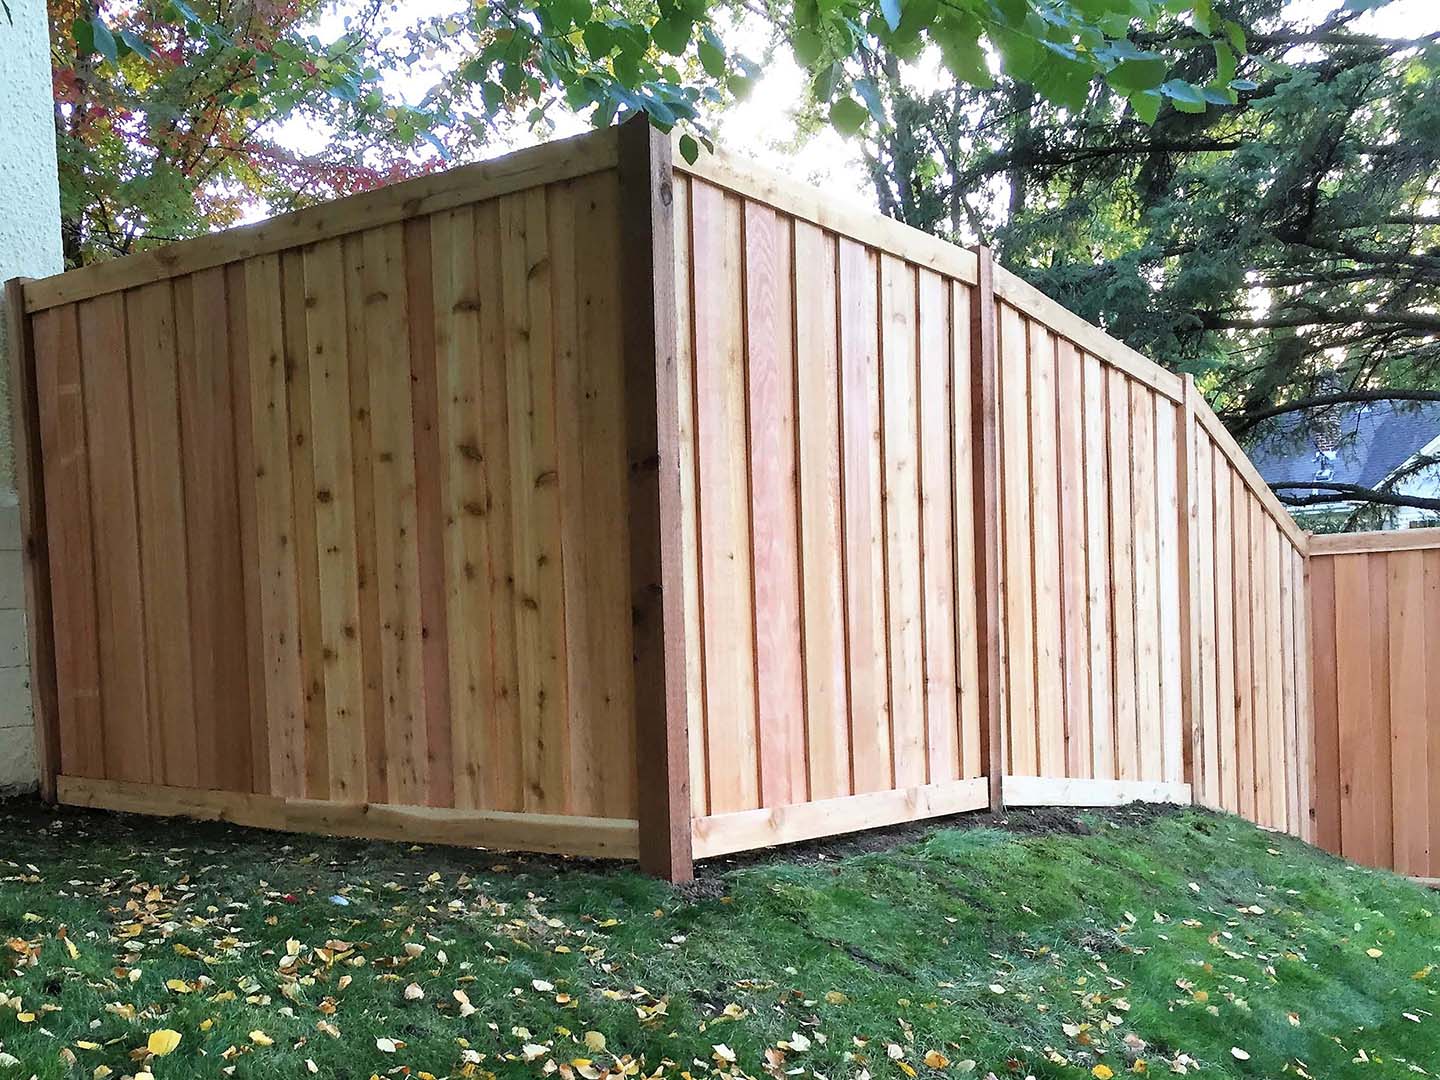 Lino Lakes MN cap and trim style wood fence